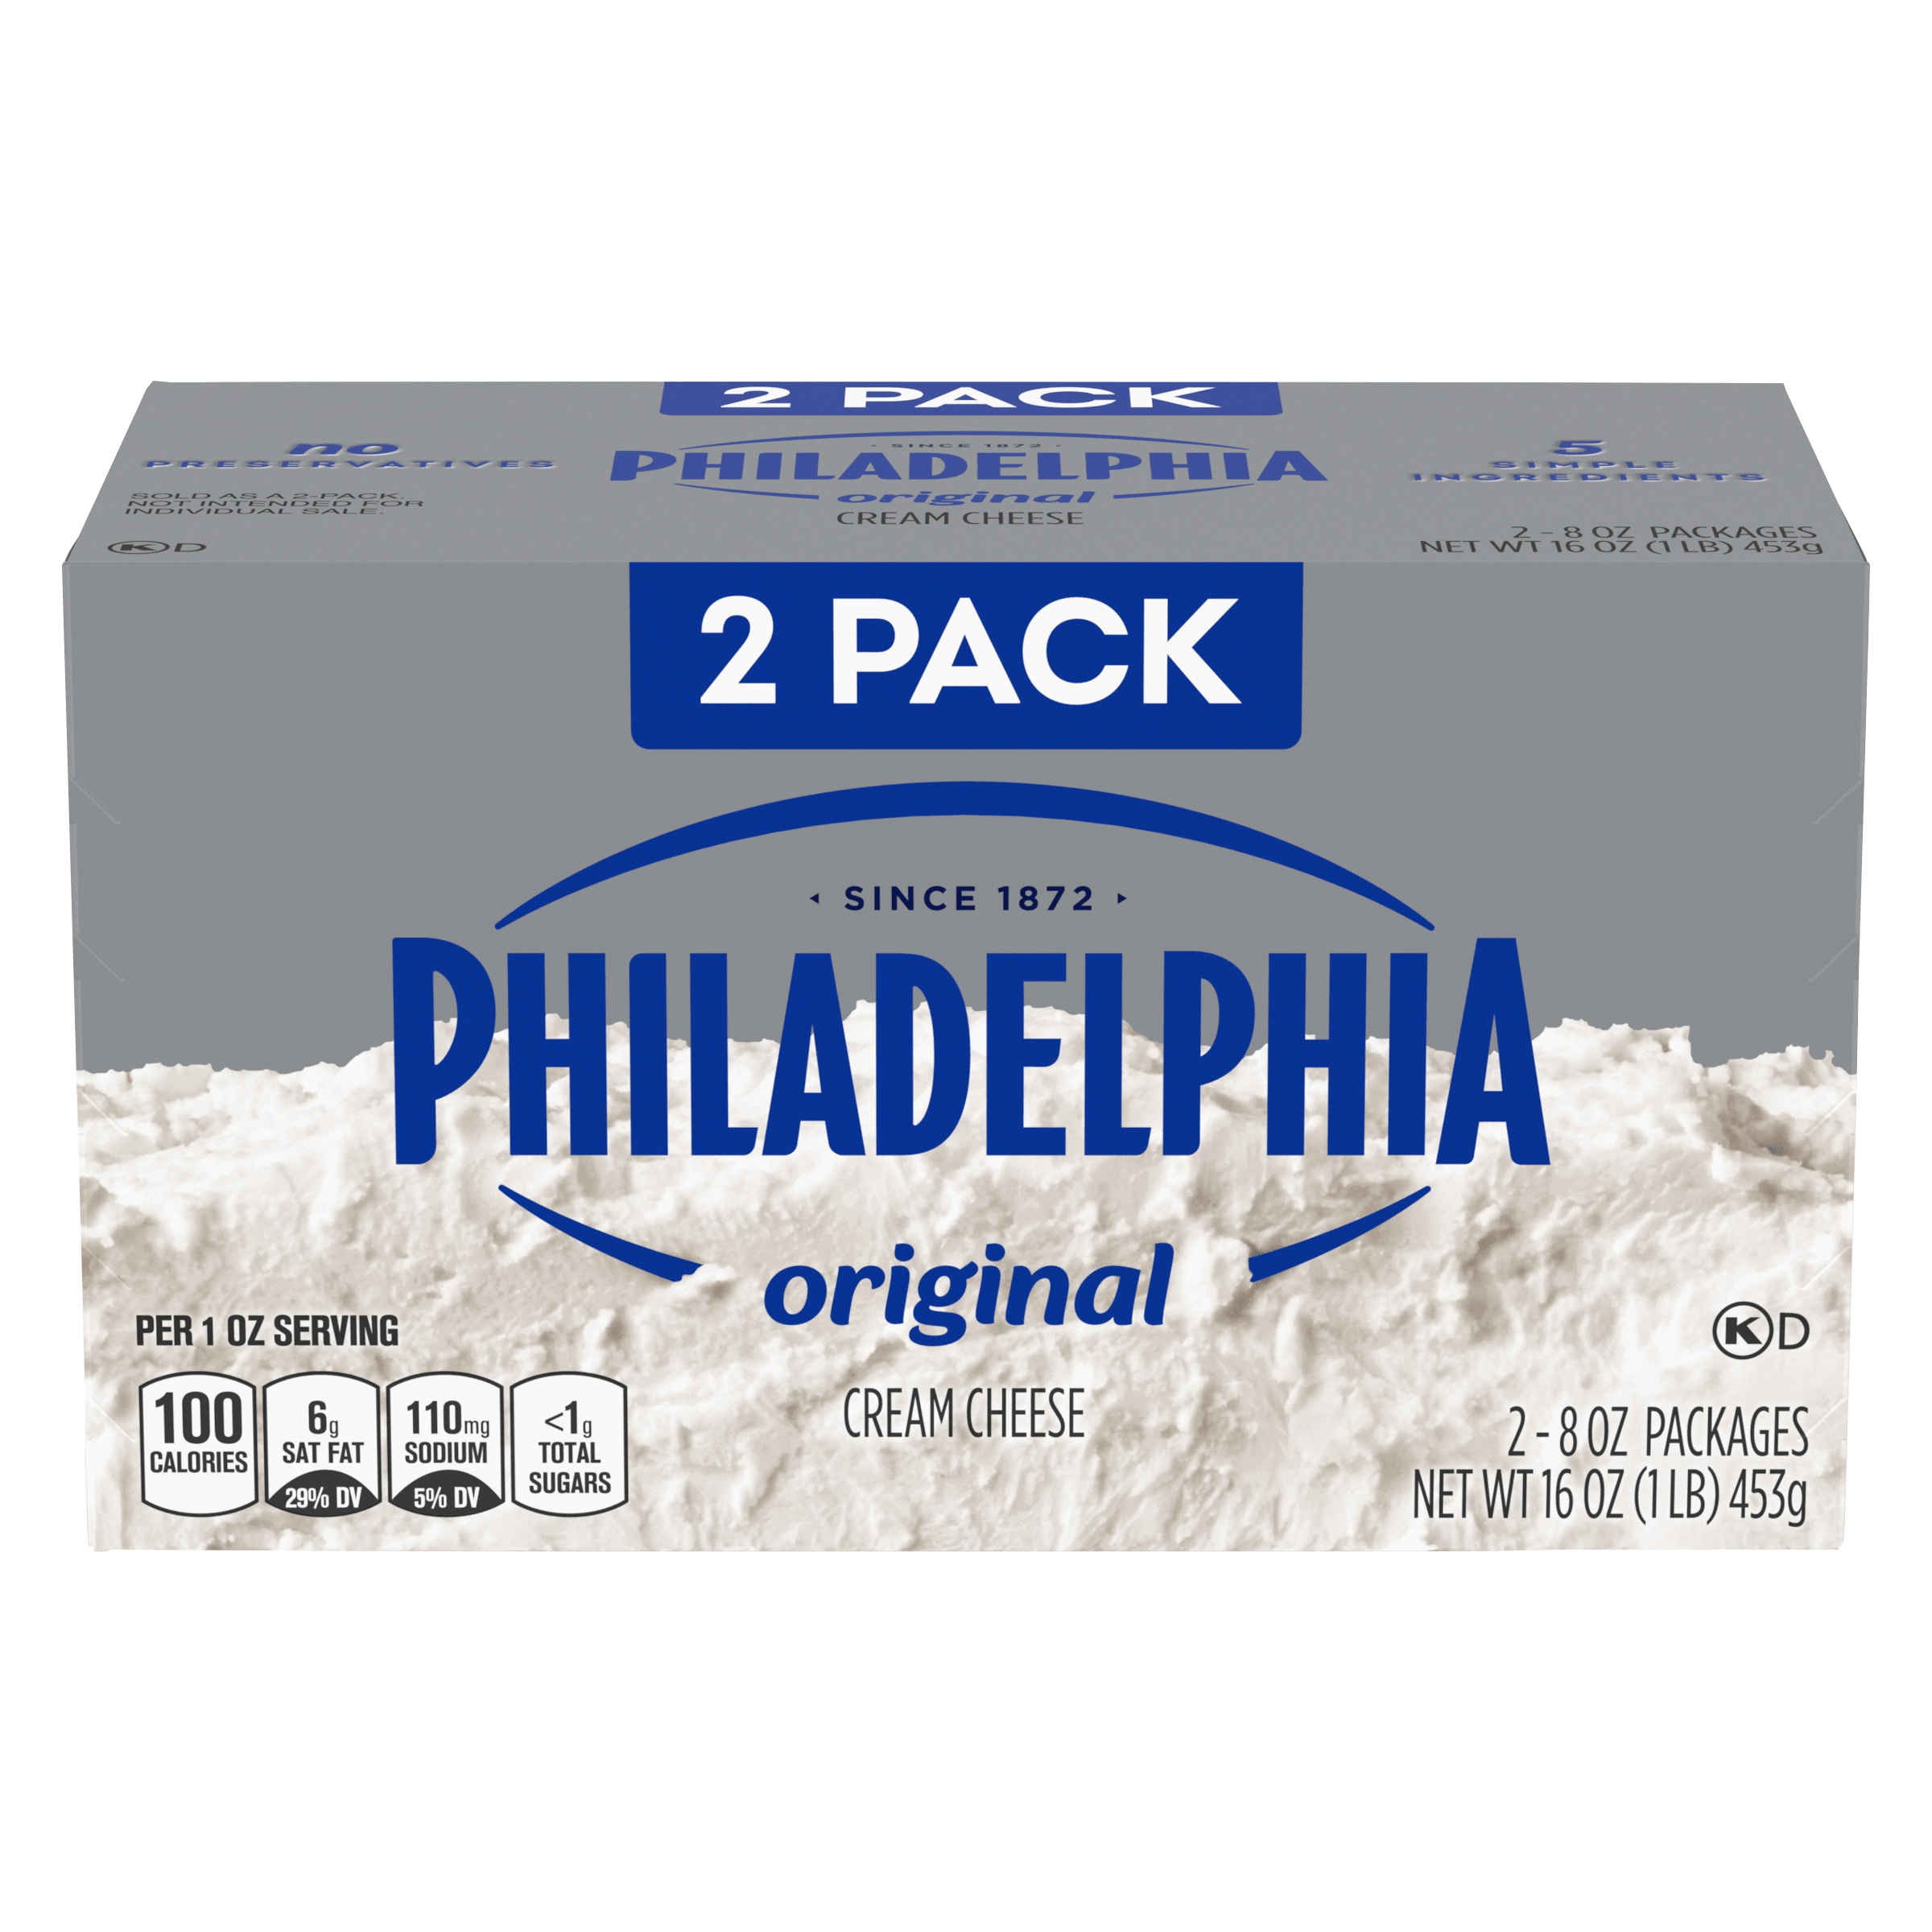 Original Cream Cheese, for a Keto and Low Carb Lifestyle